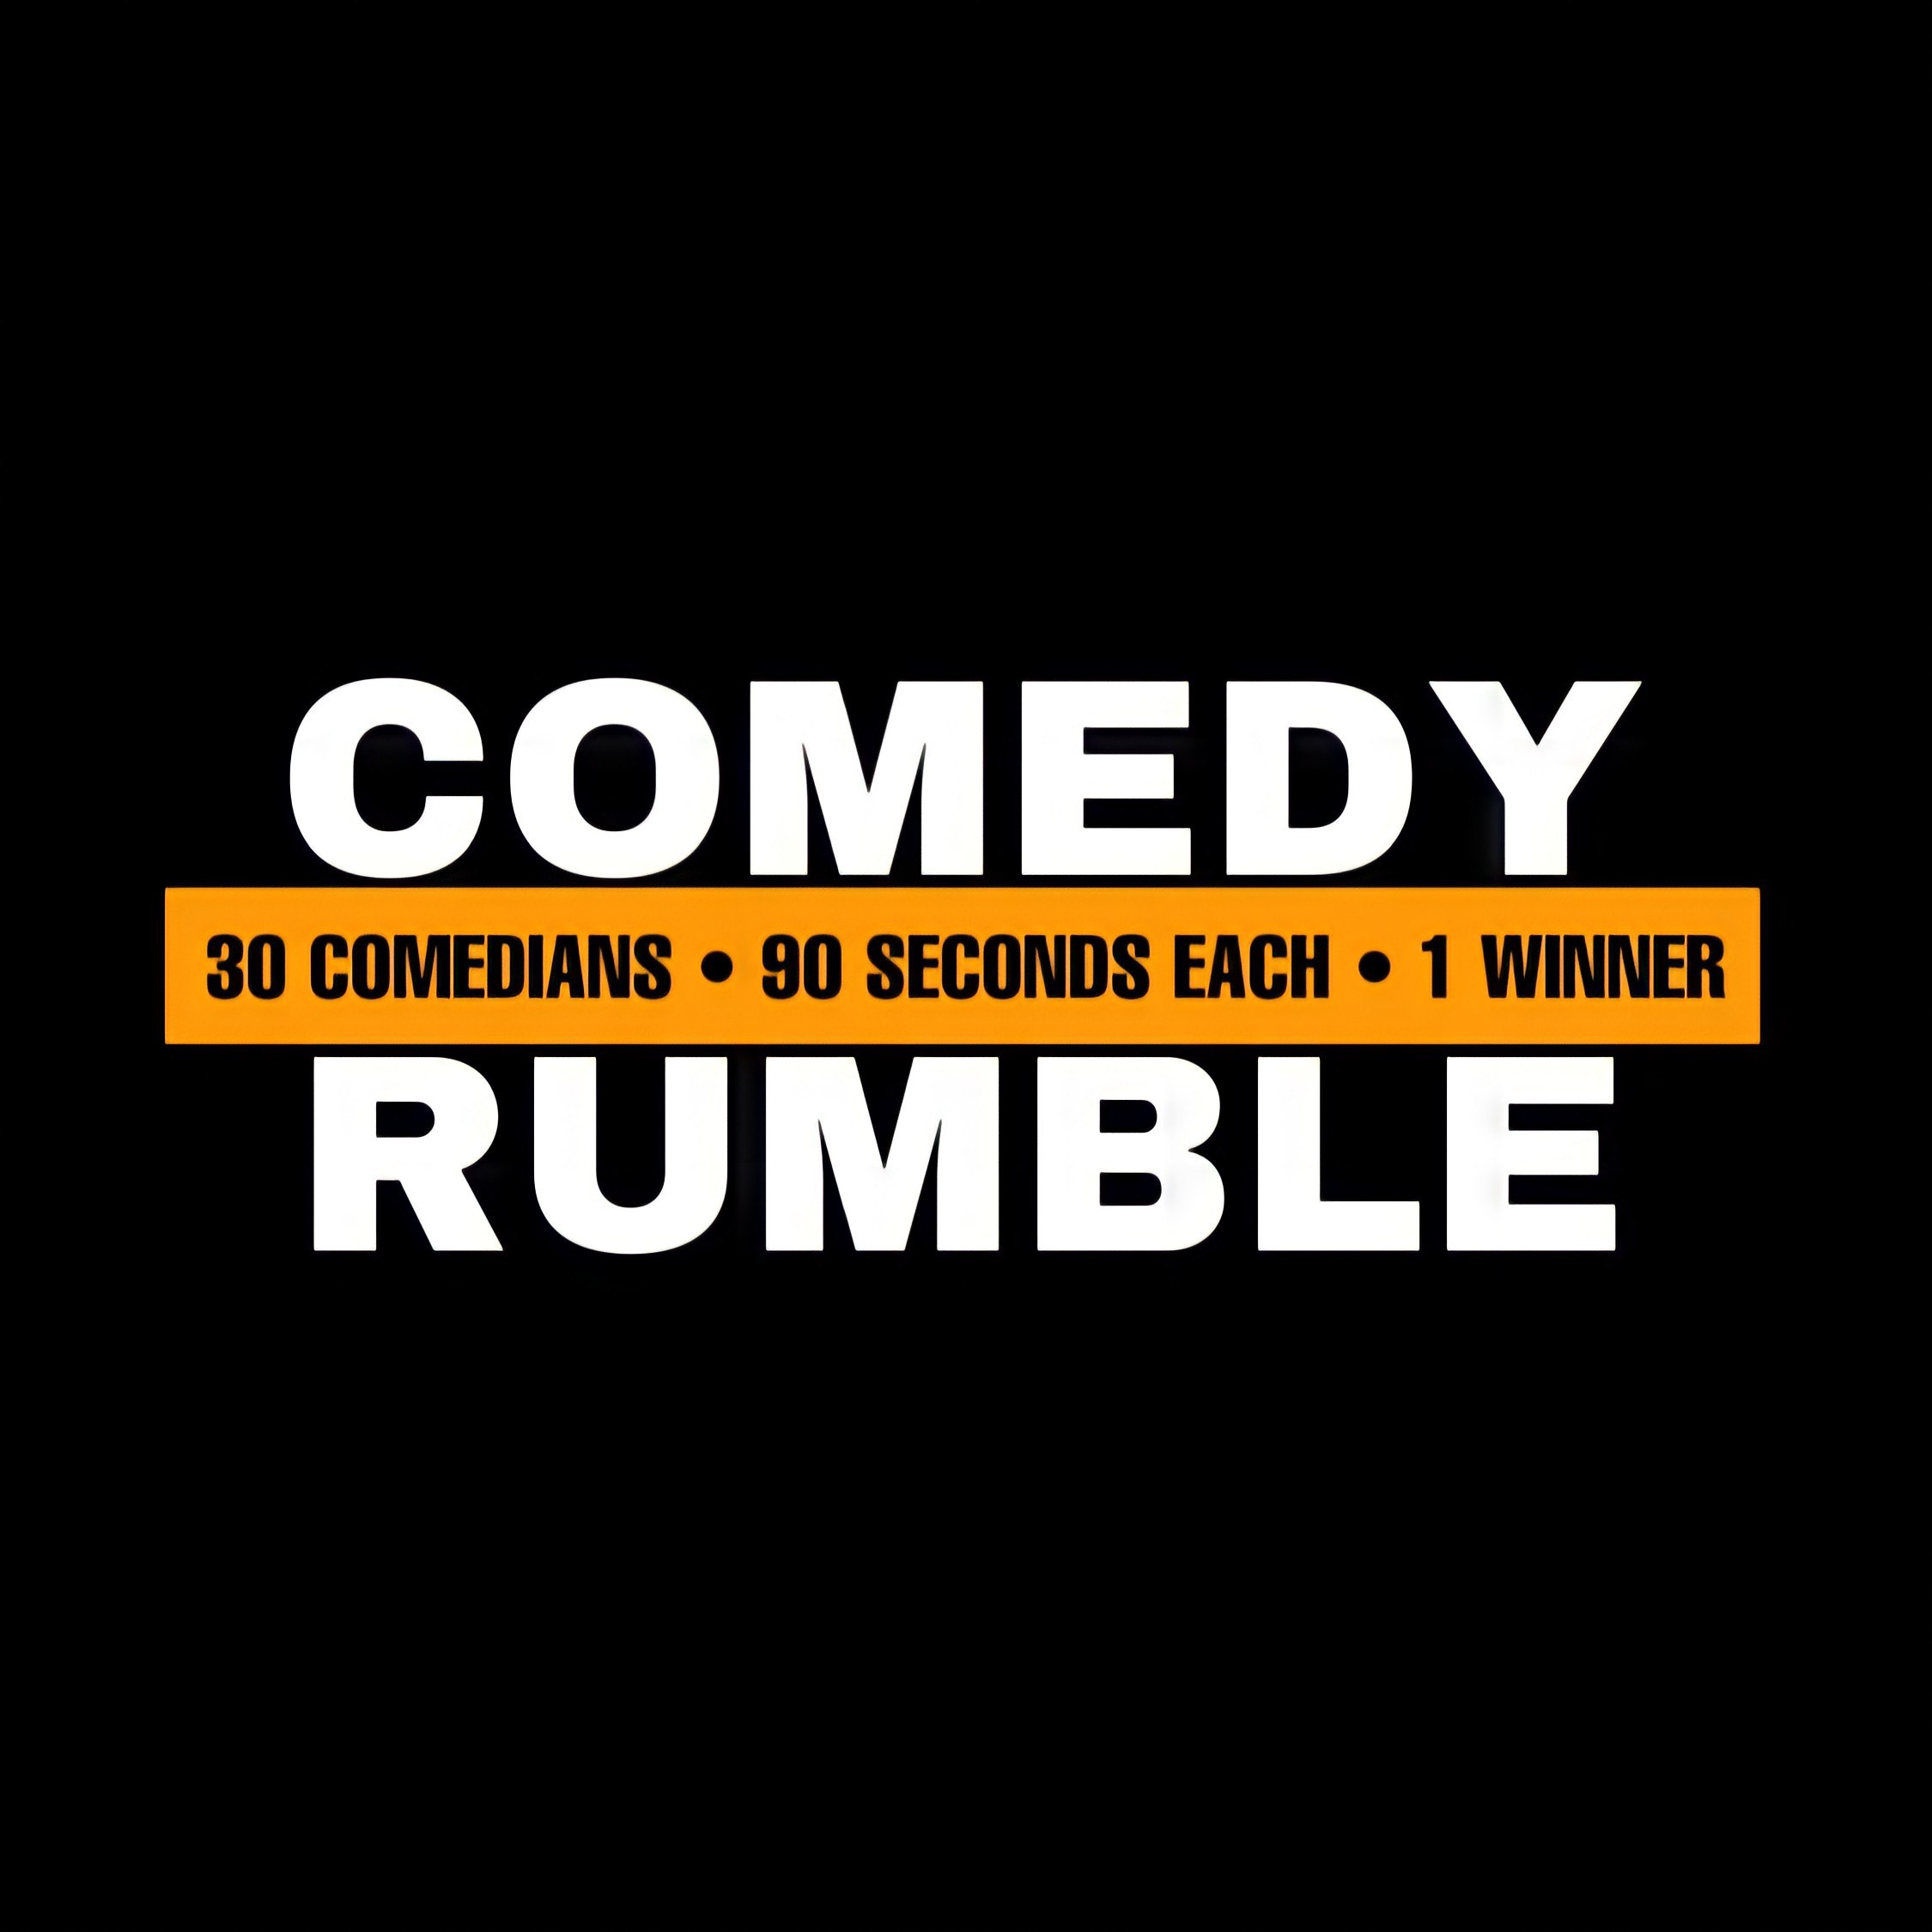 COMEDY RUMBLE